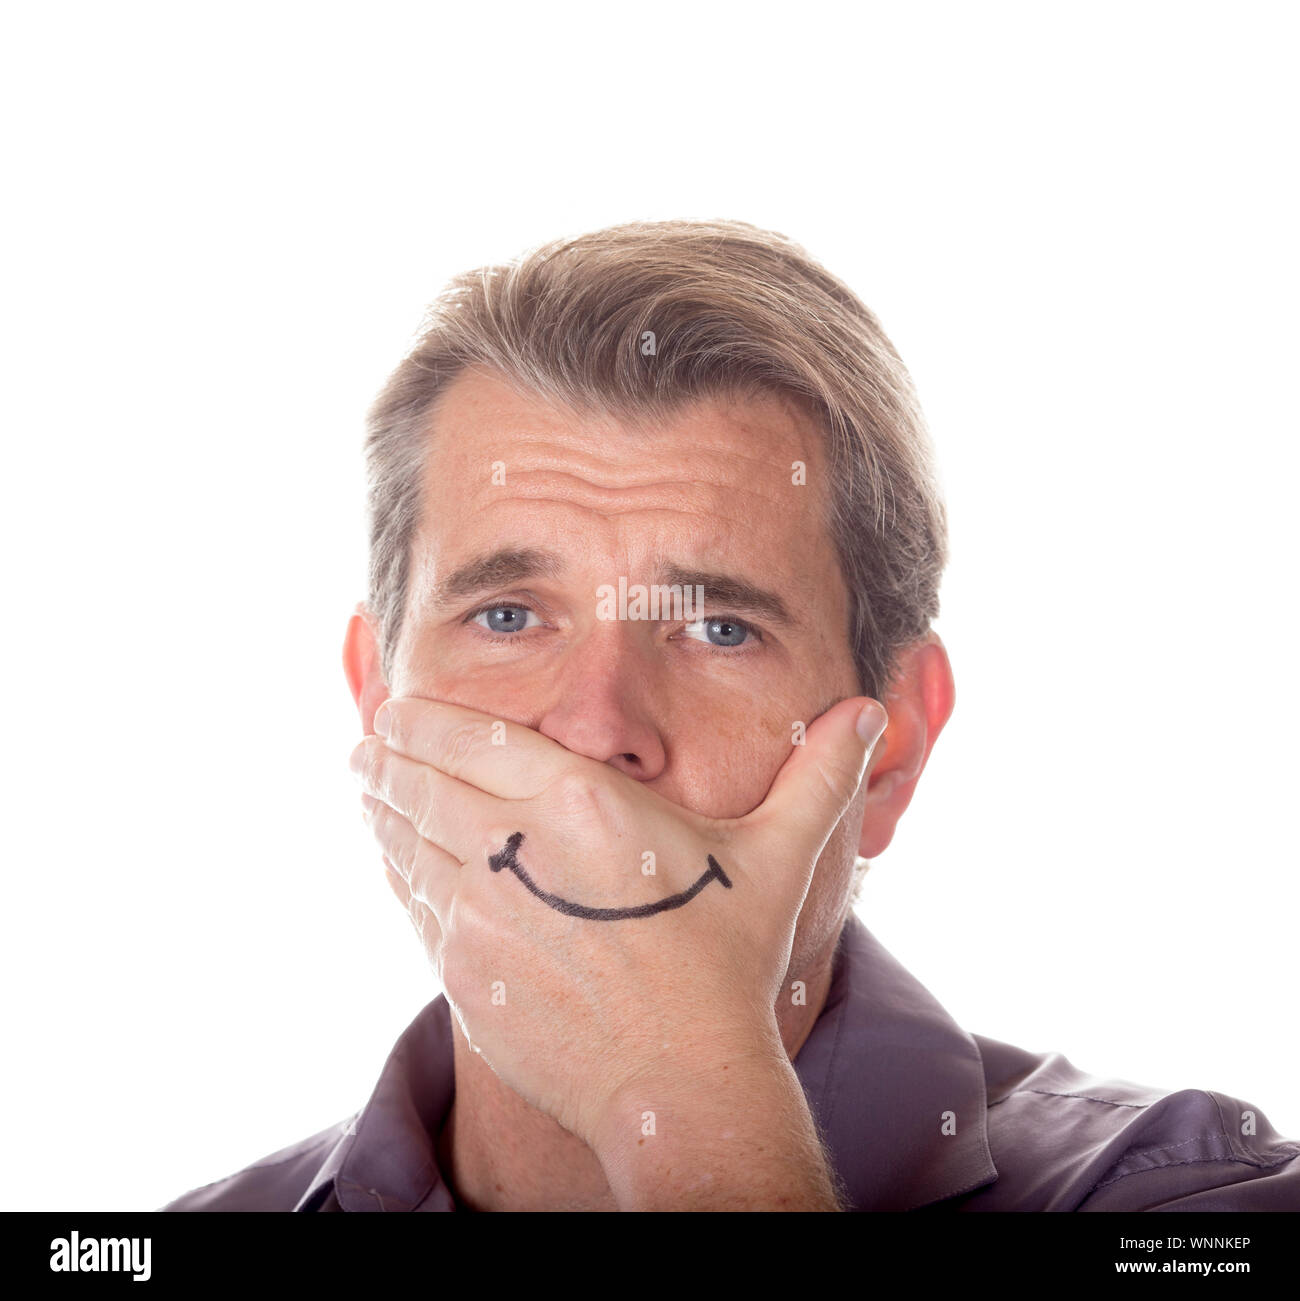 Man hiding his true emotions by covering his mouth with a fake smile drawn on his hand. Stock Photo